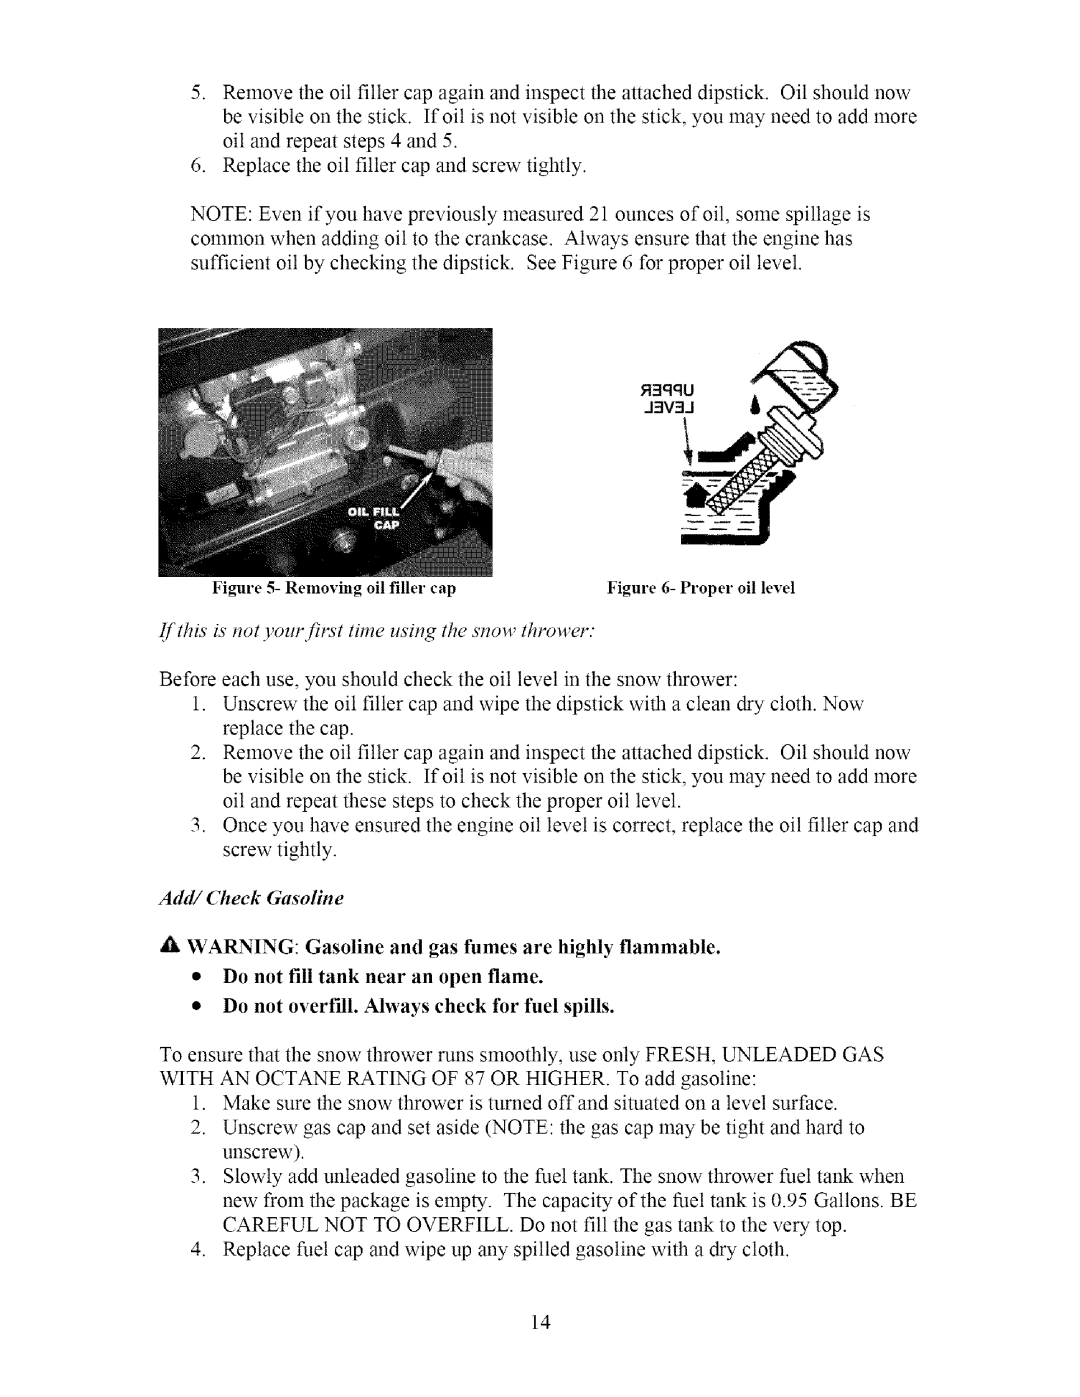 Sears 270-3250 owner manual Do not fill tank near an open flame, Do not overfill. Always check for fuel spills 